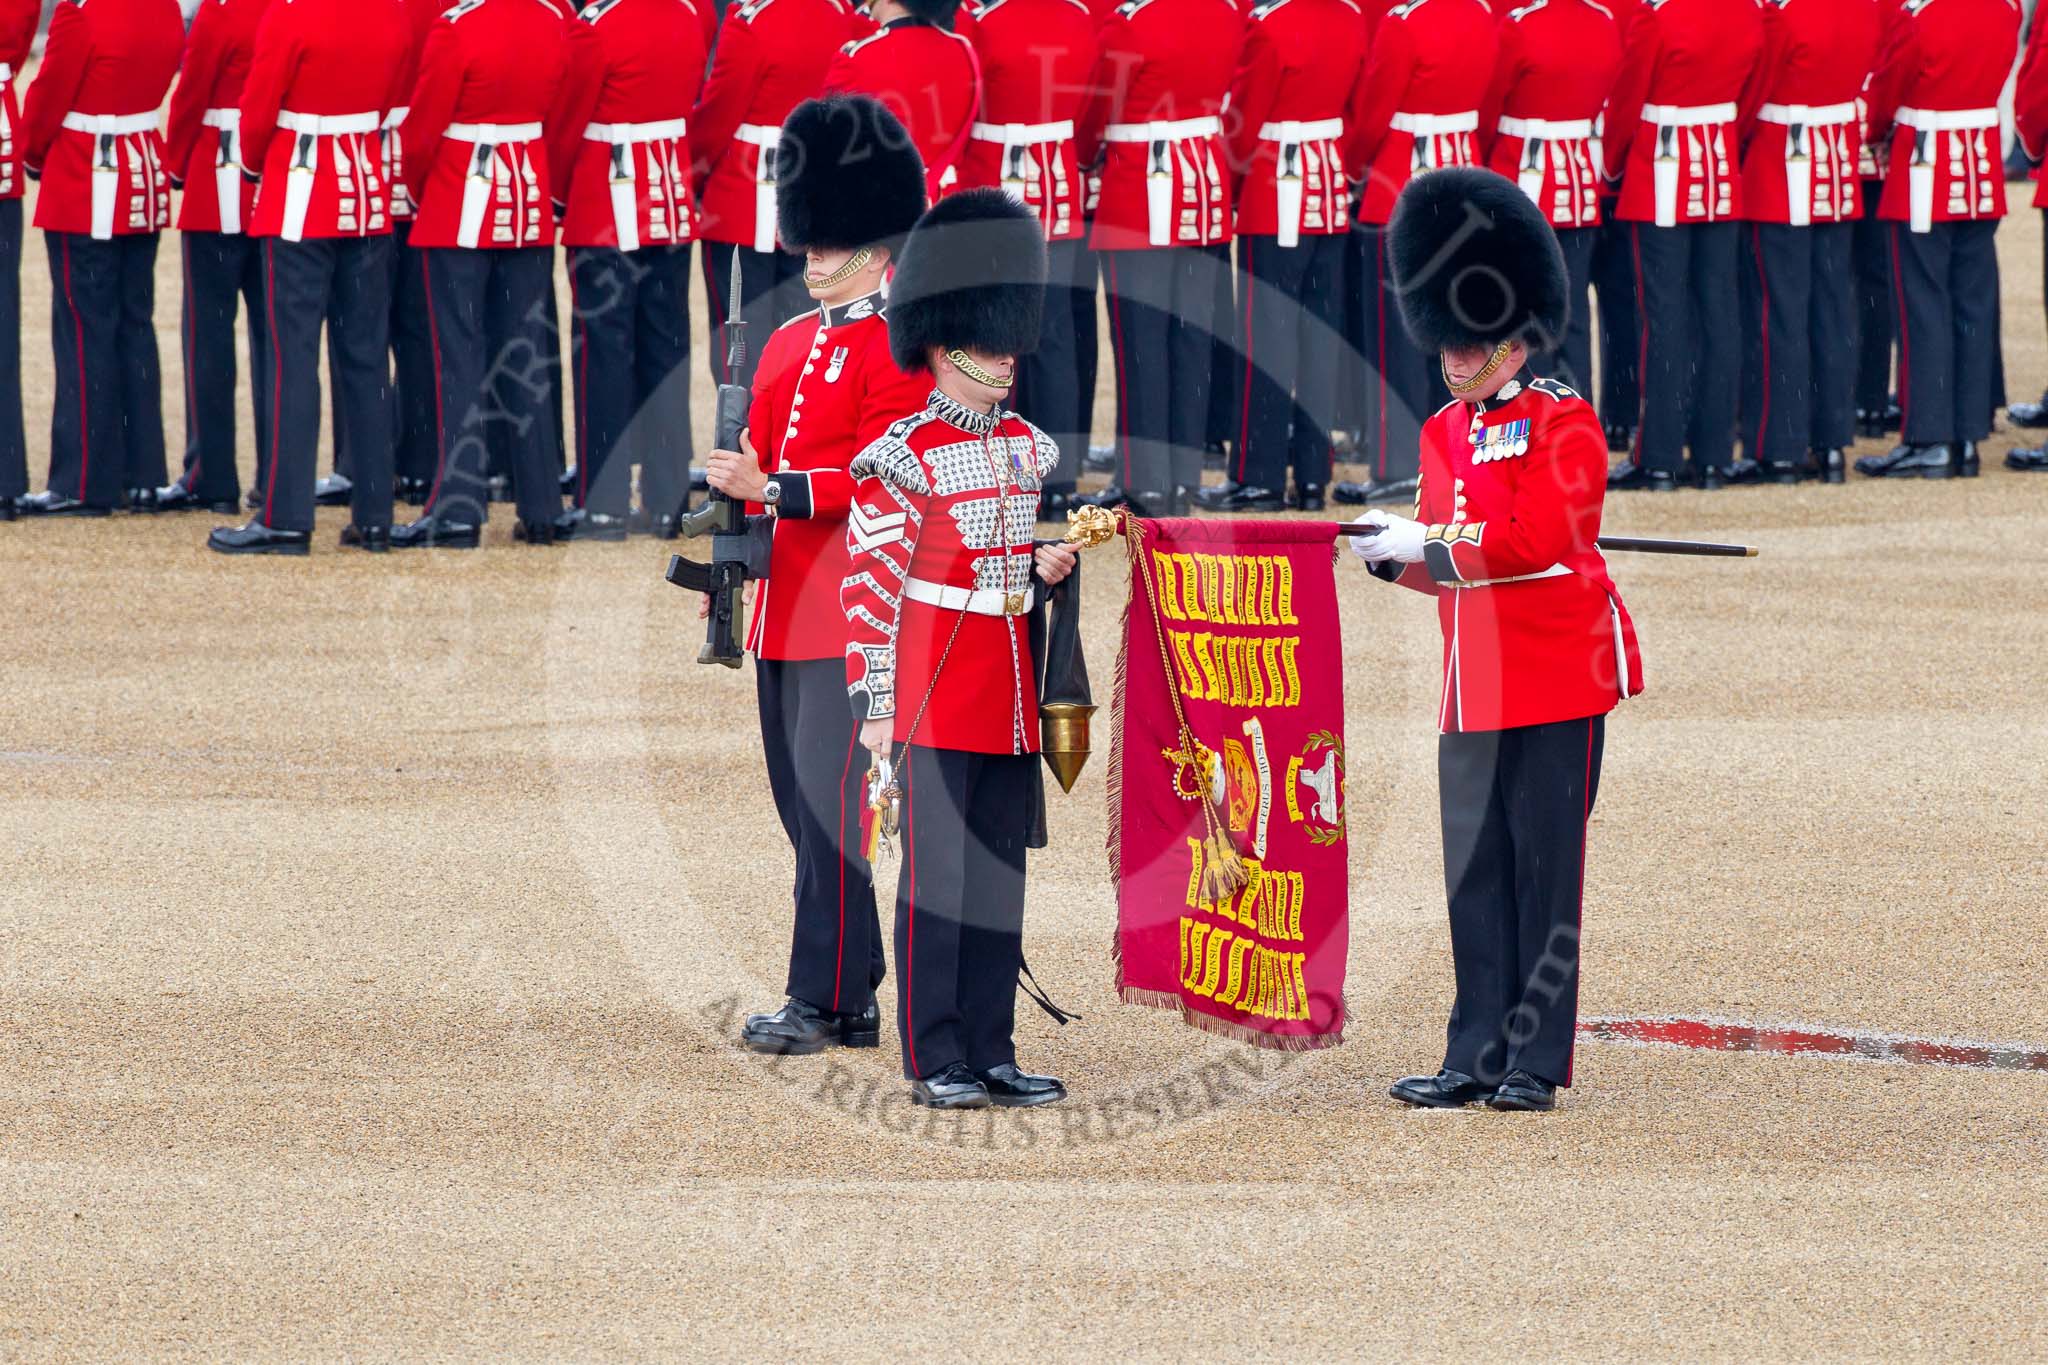 Trooping the Colour 2011: The Colour Case has been removed from the Colour, and the Colour Sergeant Chris Millin, has unrolled the flag, whilst the Duty Drummer is holding the colour case, and the sentry is presenting arms..
Horse Guards Parade, Westminster,
London SW1,
Greater London,
United Kingdom,
on 11 June 2011 at 10:33, image #55